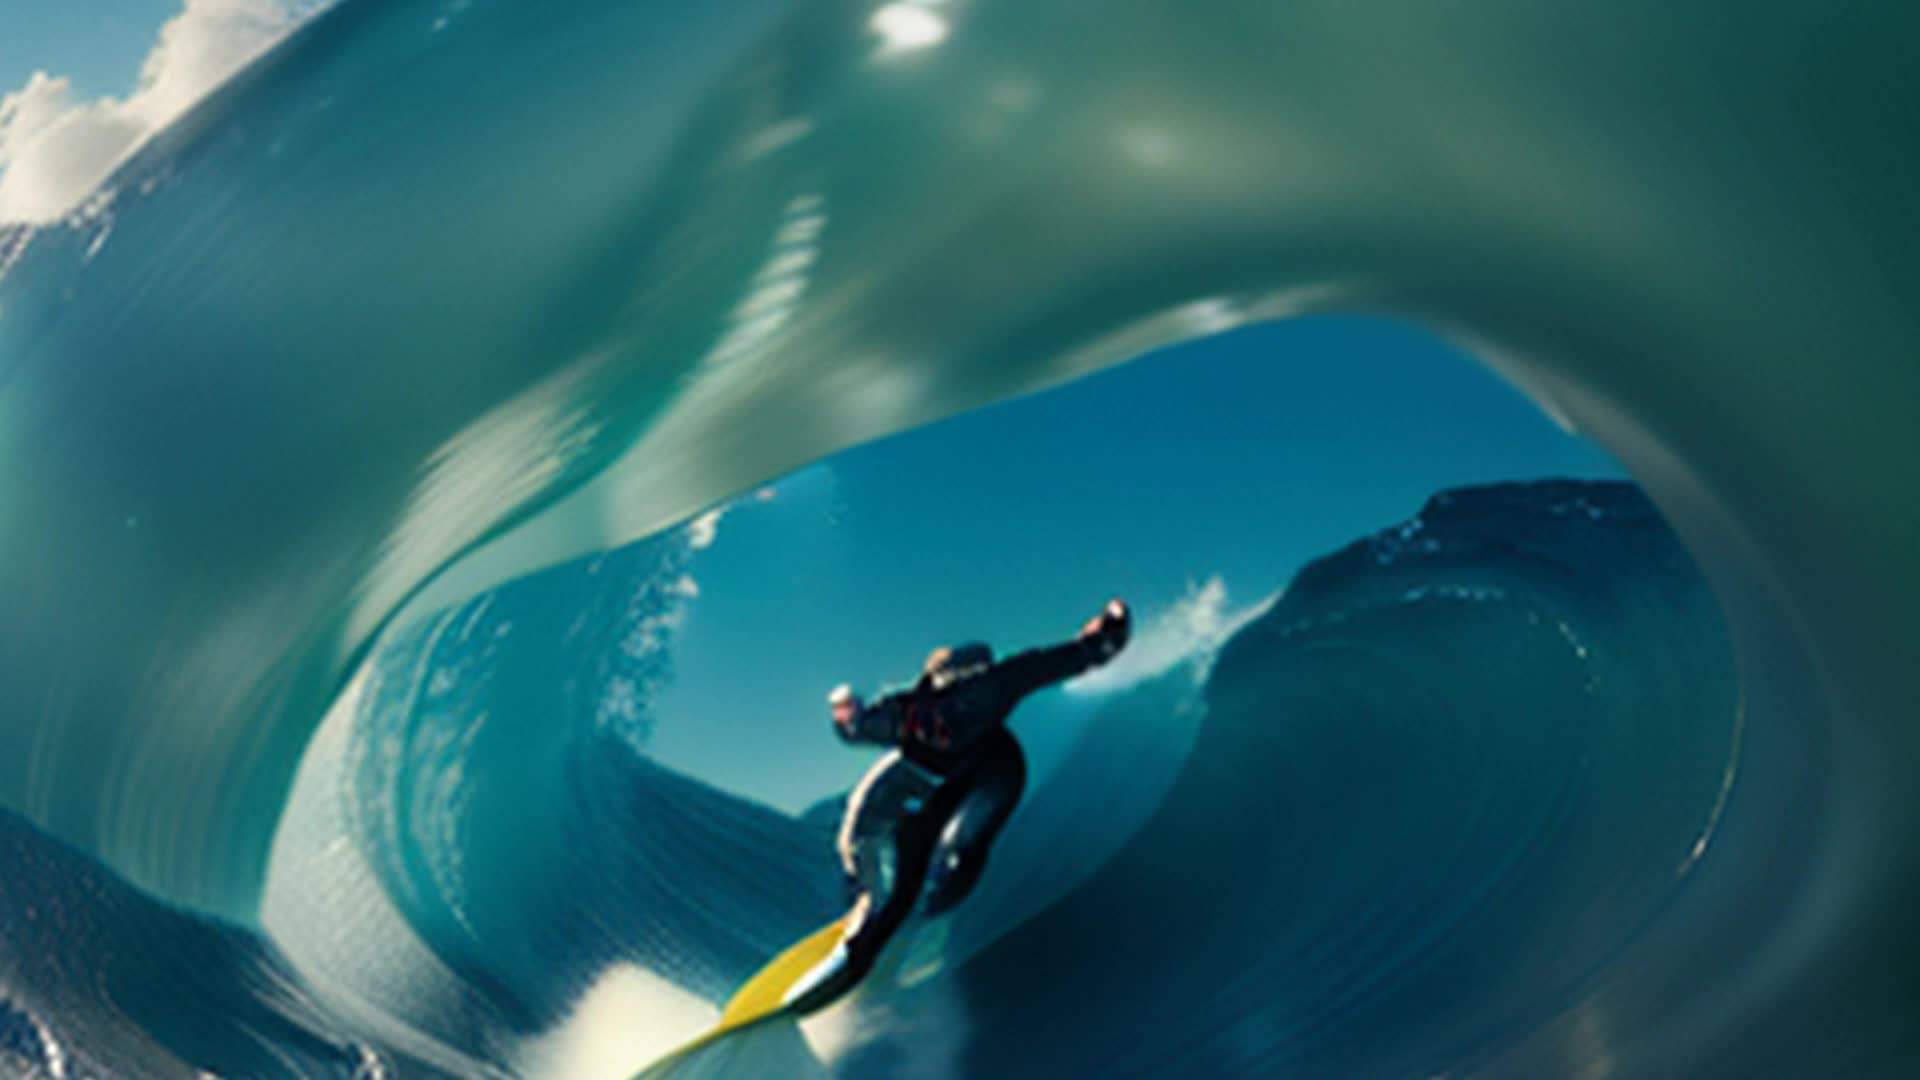 Dynamic surfer riding inside massive Hawaiian wave tunnel, ocean spray glistening in sunlight, turquoise and deep blue hues in water, highenergy, intense action shot, detailed and sharp focus, captured midturn, powerful rippling wave, sunlight filtering through water, soft shadows, wideangle perspective, cinematic high definition, GoPro perspective, rendered by octane